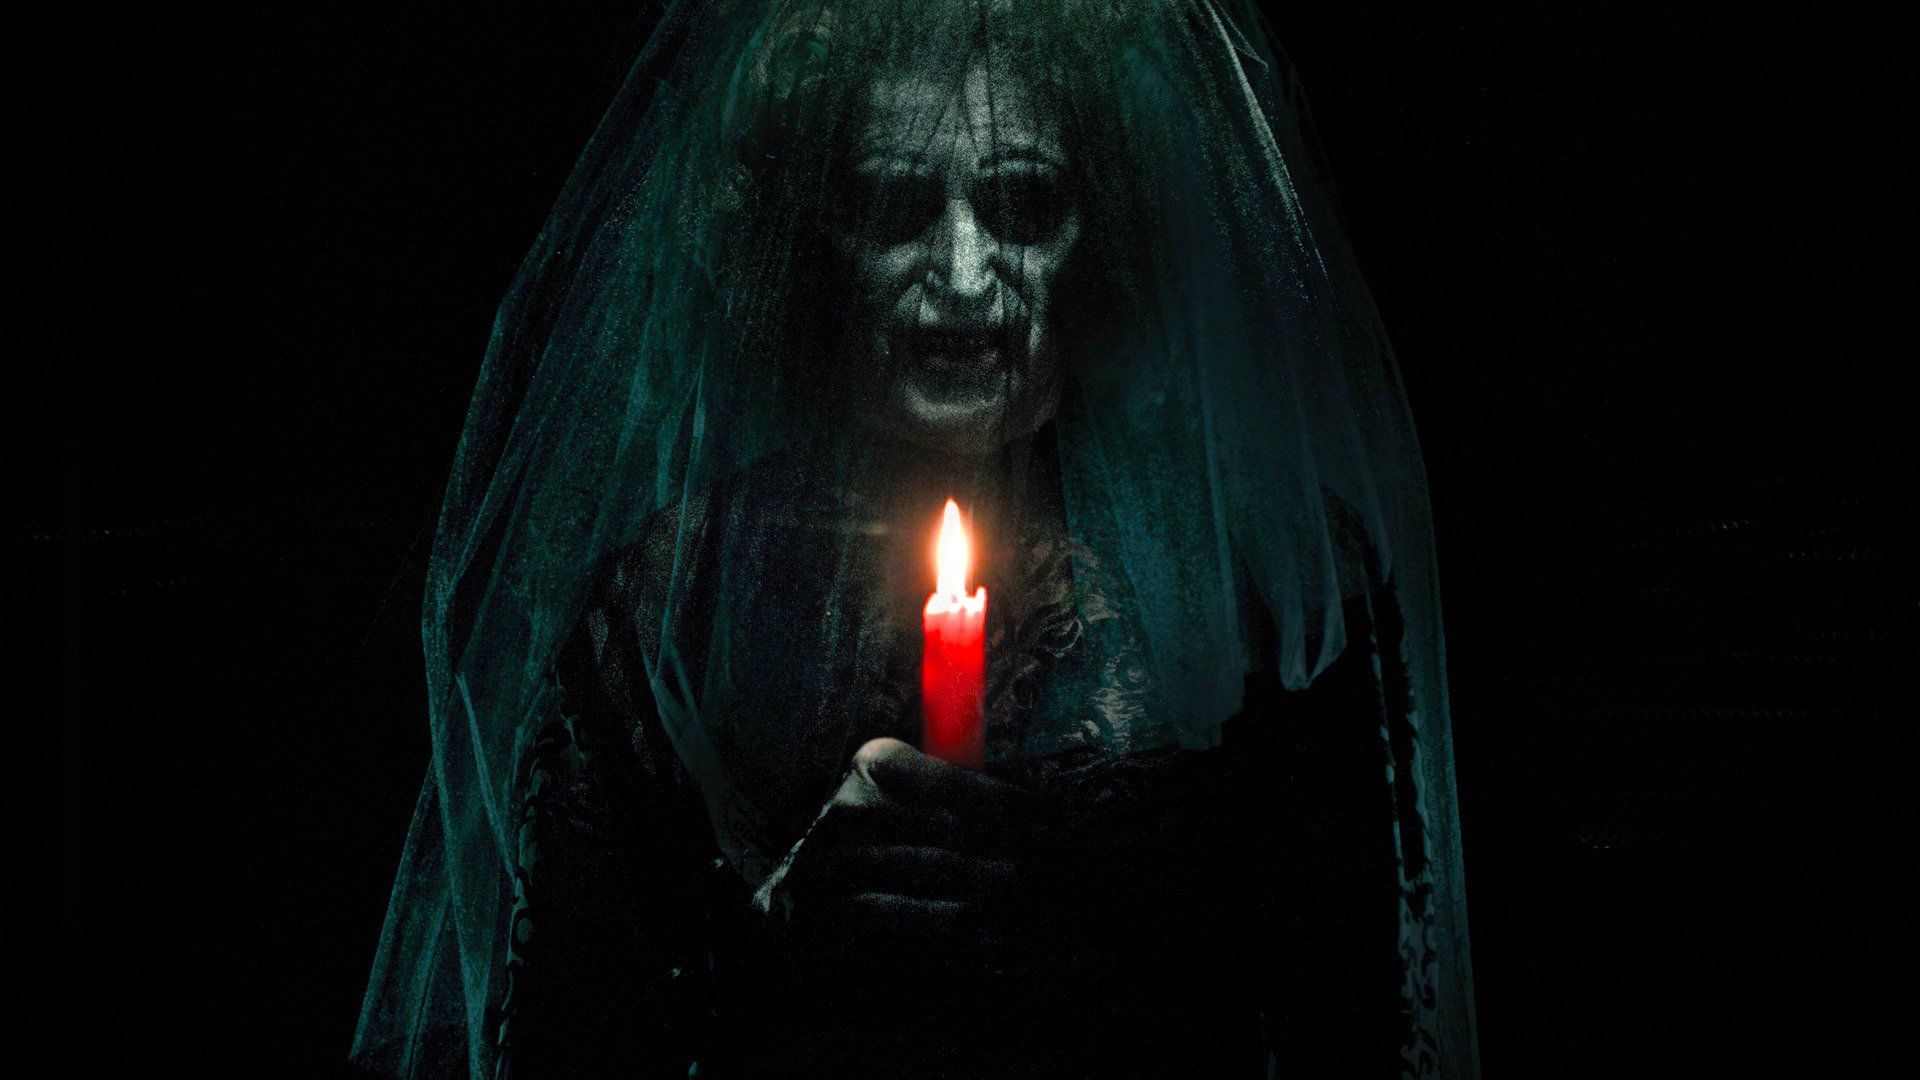 Insidious: Chapter 3 Wallpapers